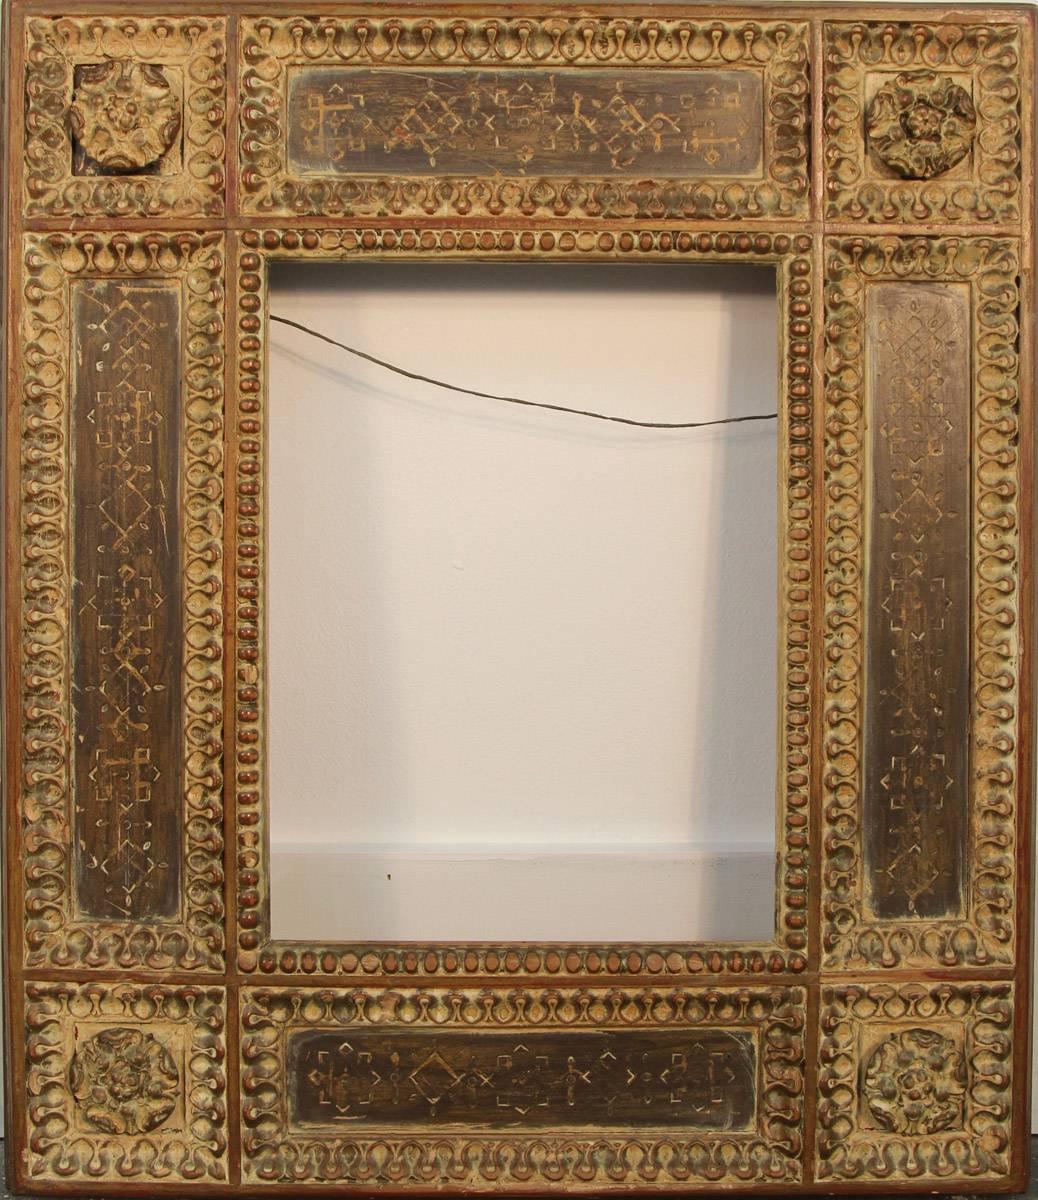 A very rare antique American frame attributed to Tiffany or Tiffany Associated Artists. Having probably been the frame for one of Louis Comfort Tiffany's own original paintings, with antique paper pencil drawing on artists paper attached on back.